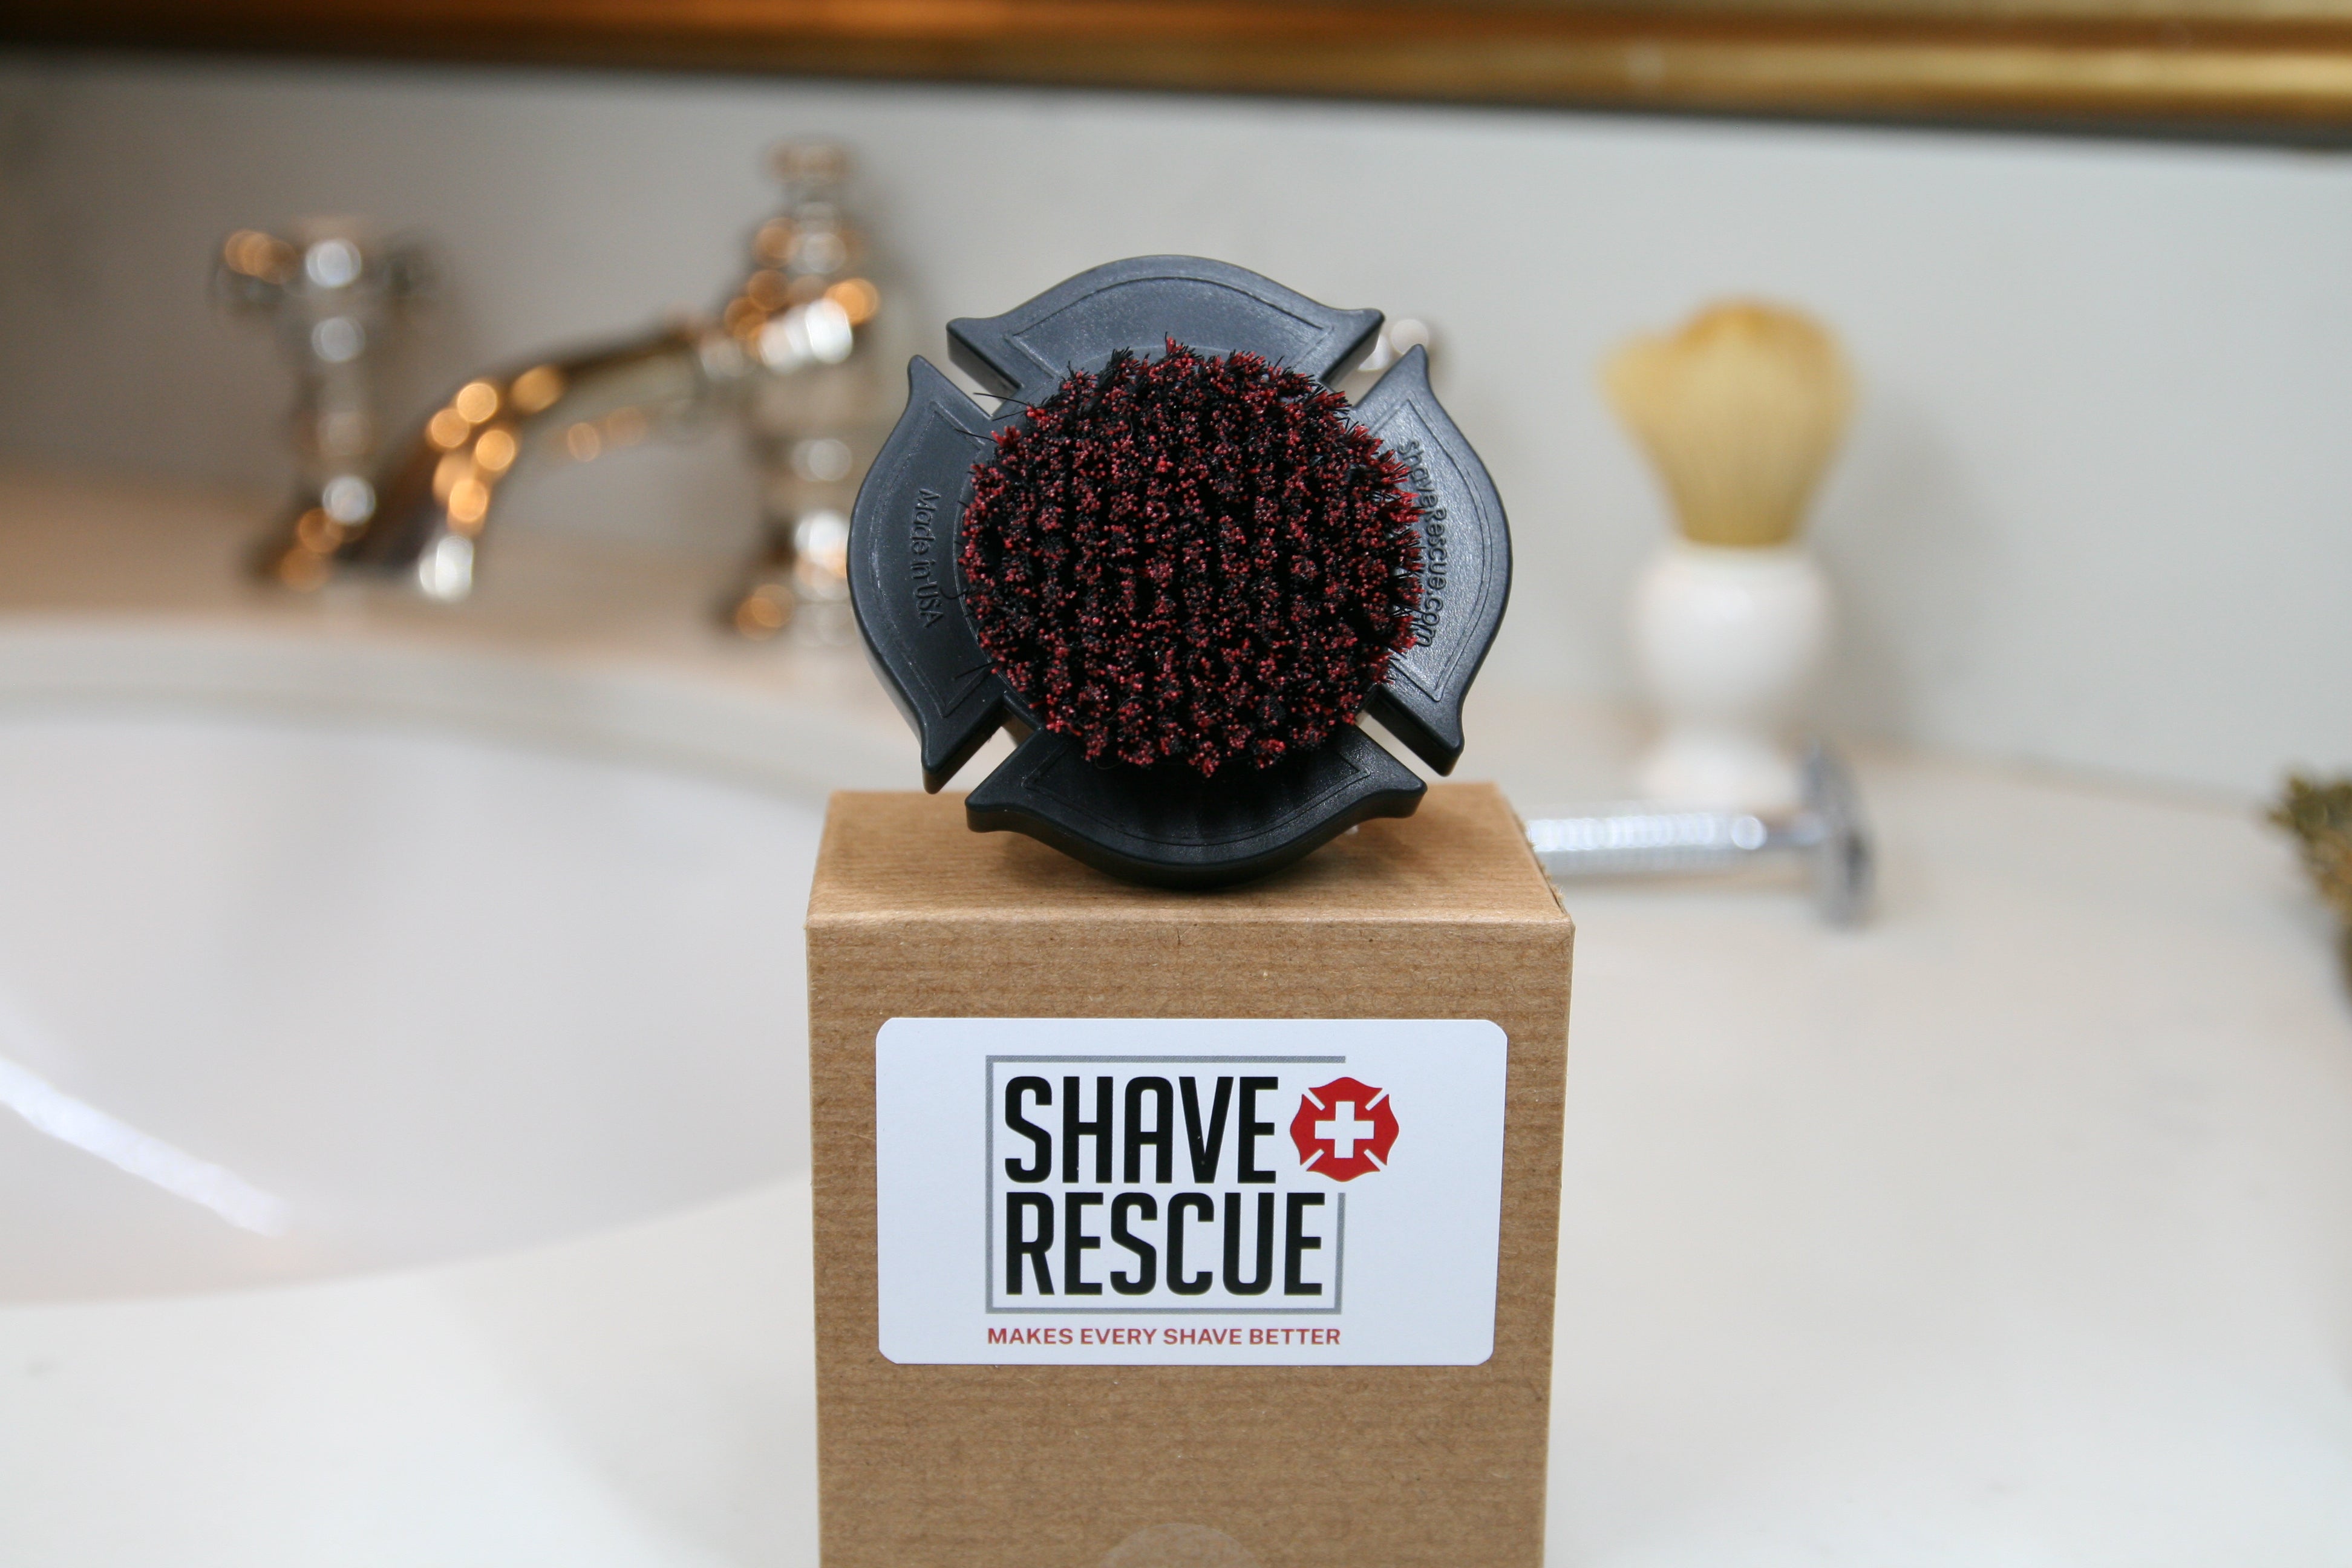 Razor Blade Cleaning Brush - The Original Rescue Brush by Shave Rescue